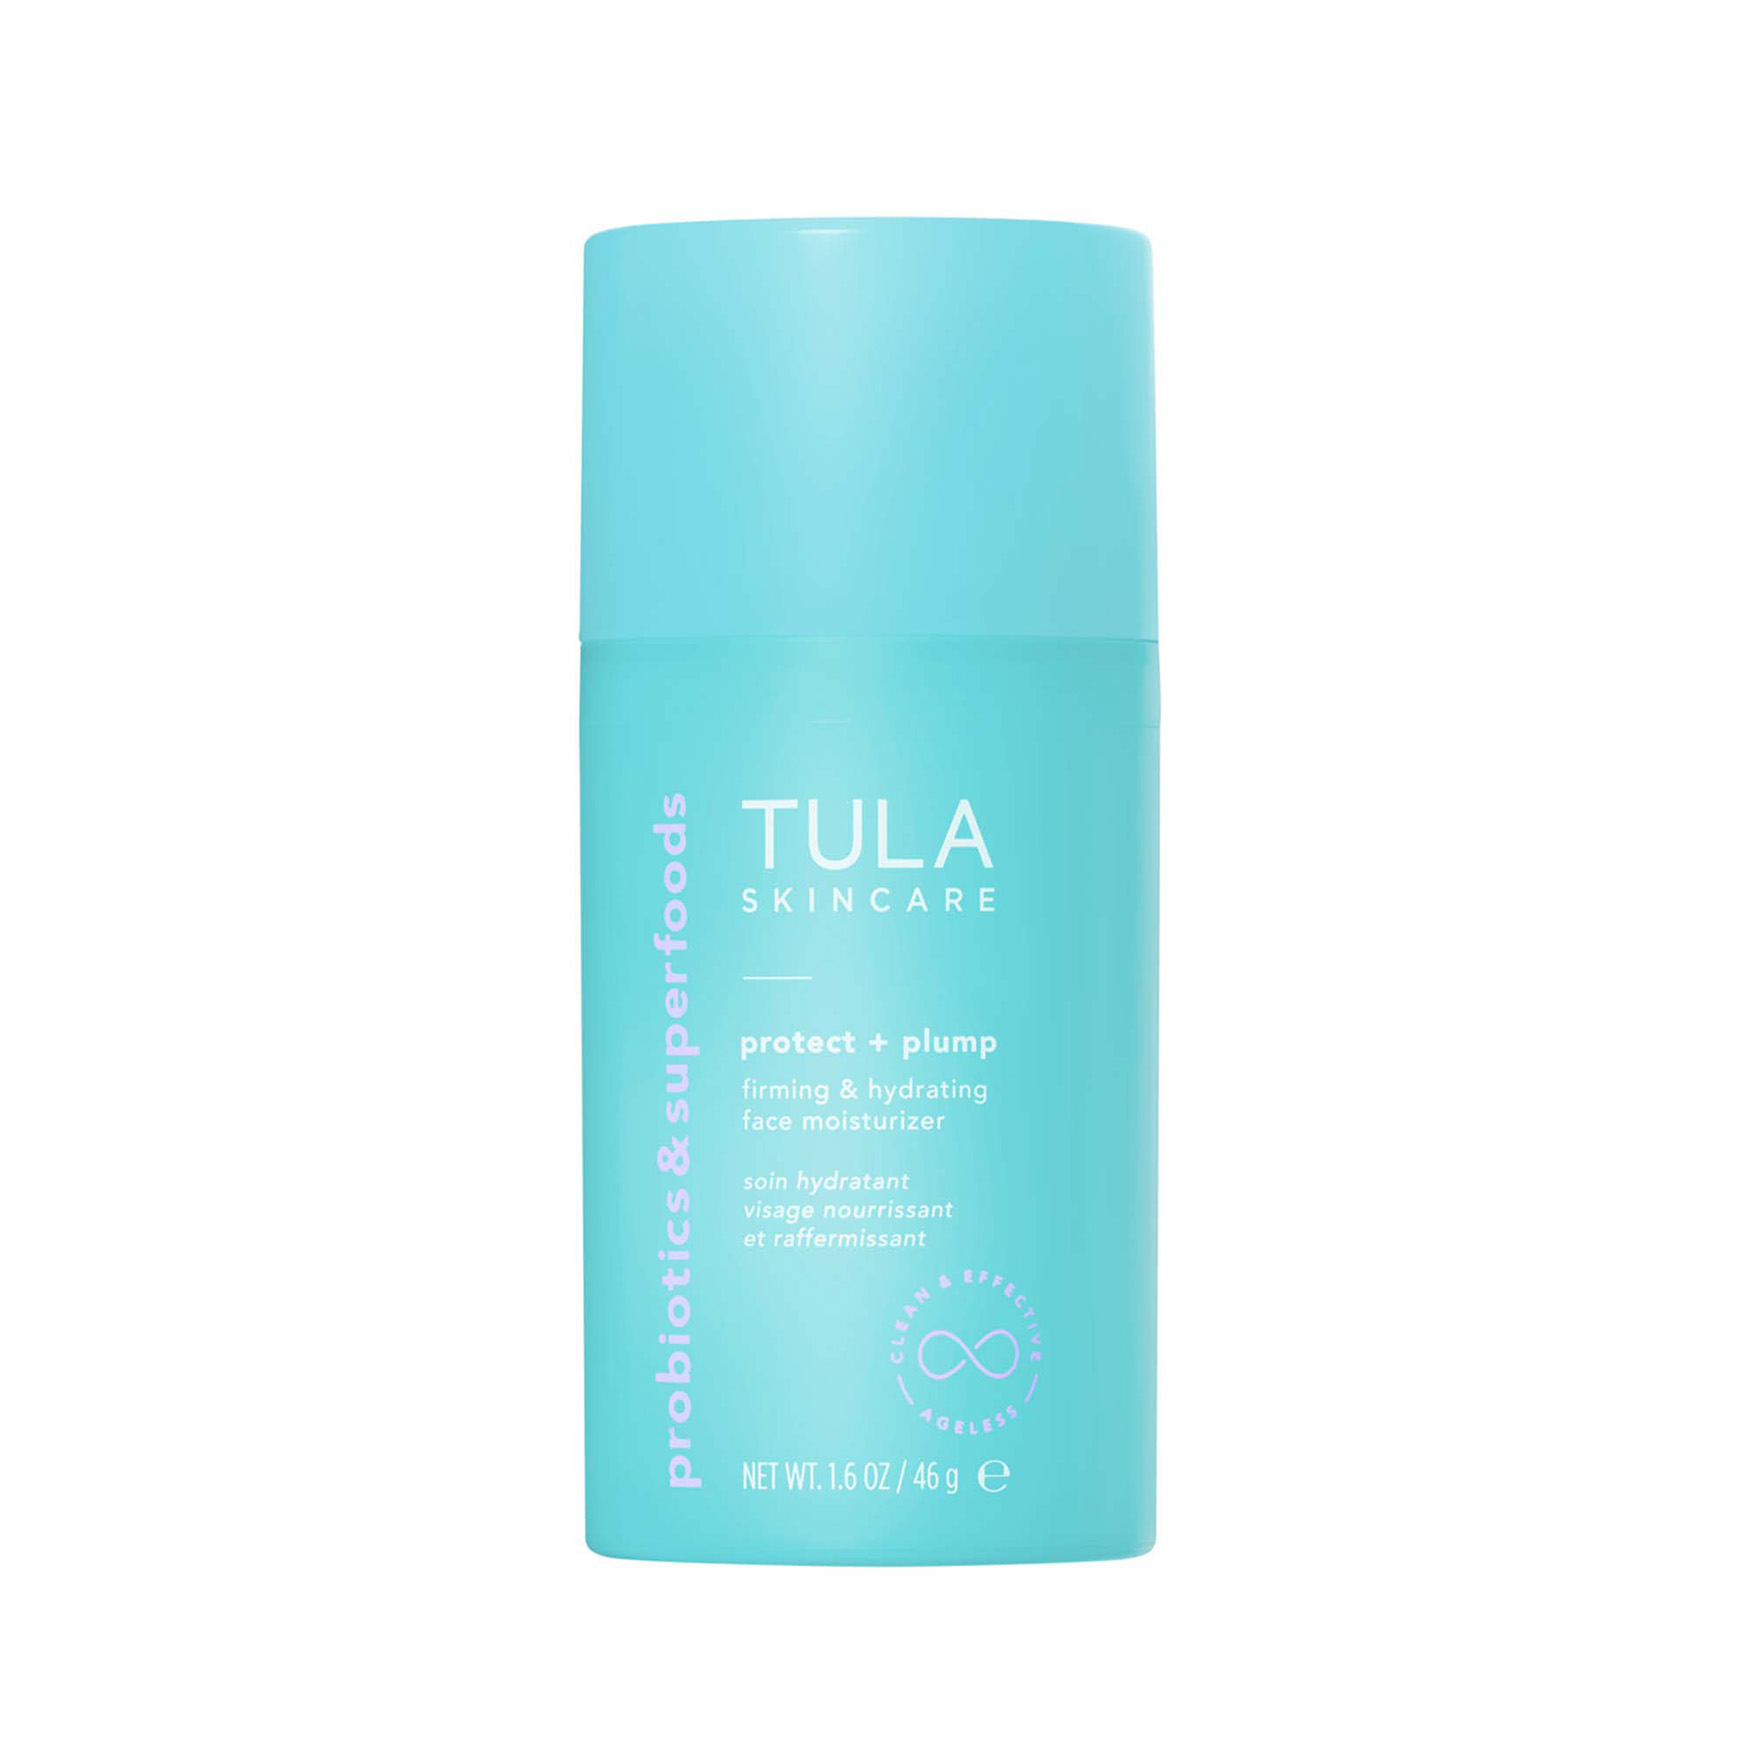 Tula Skincare Protect + Plump Firming & Hydrating Moisturizer | Space NK